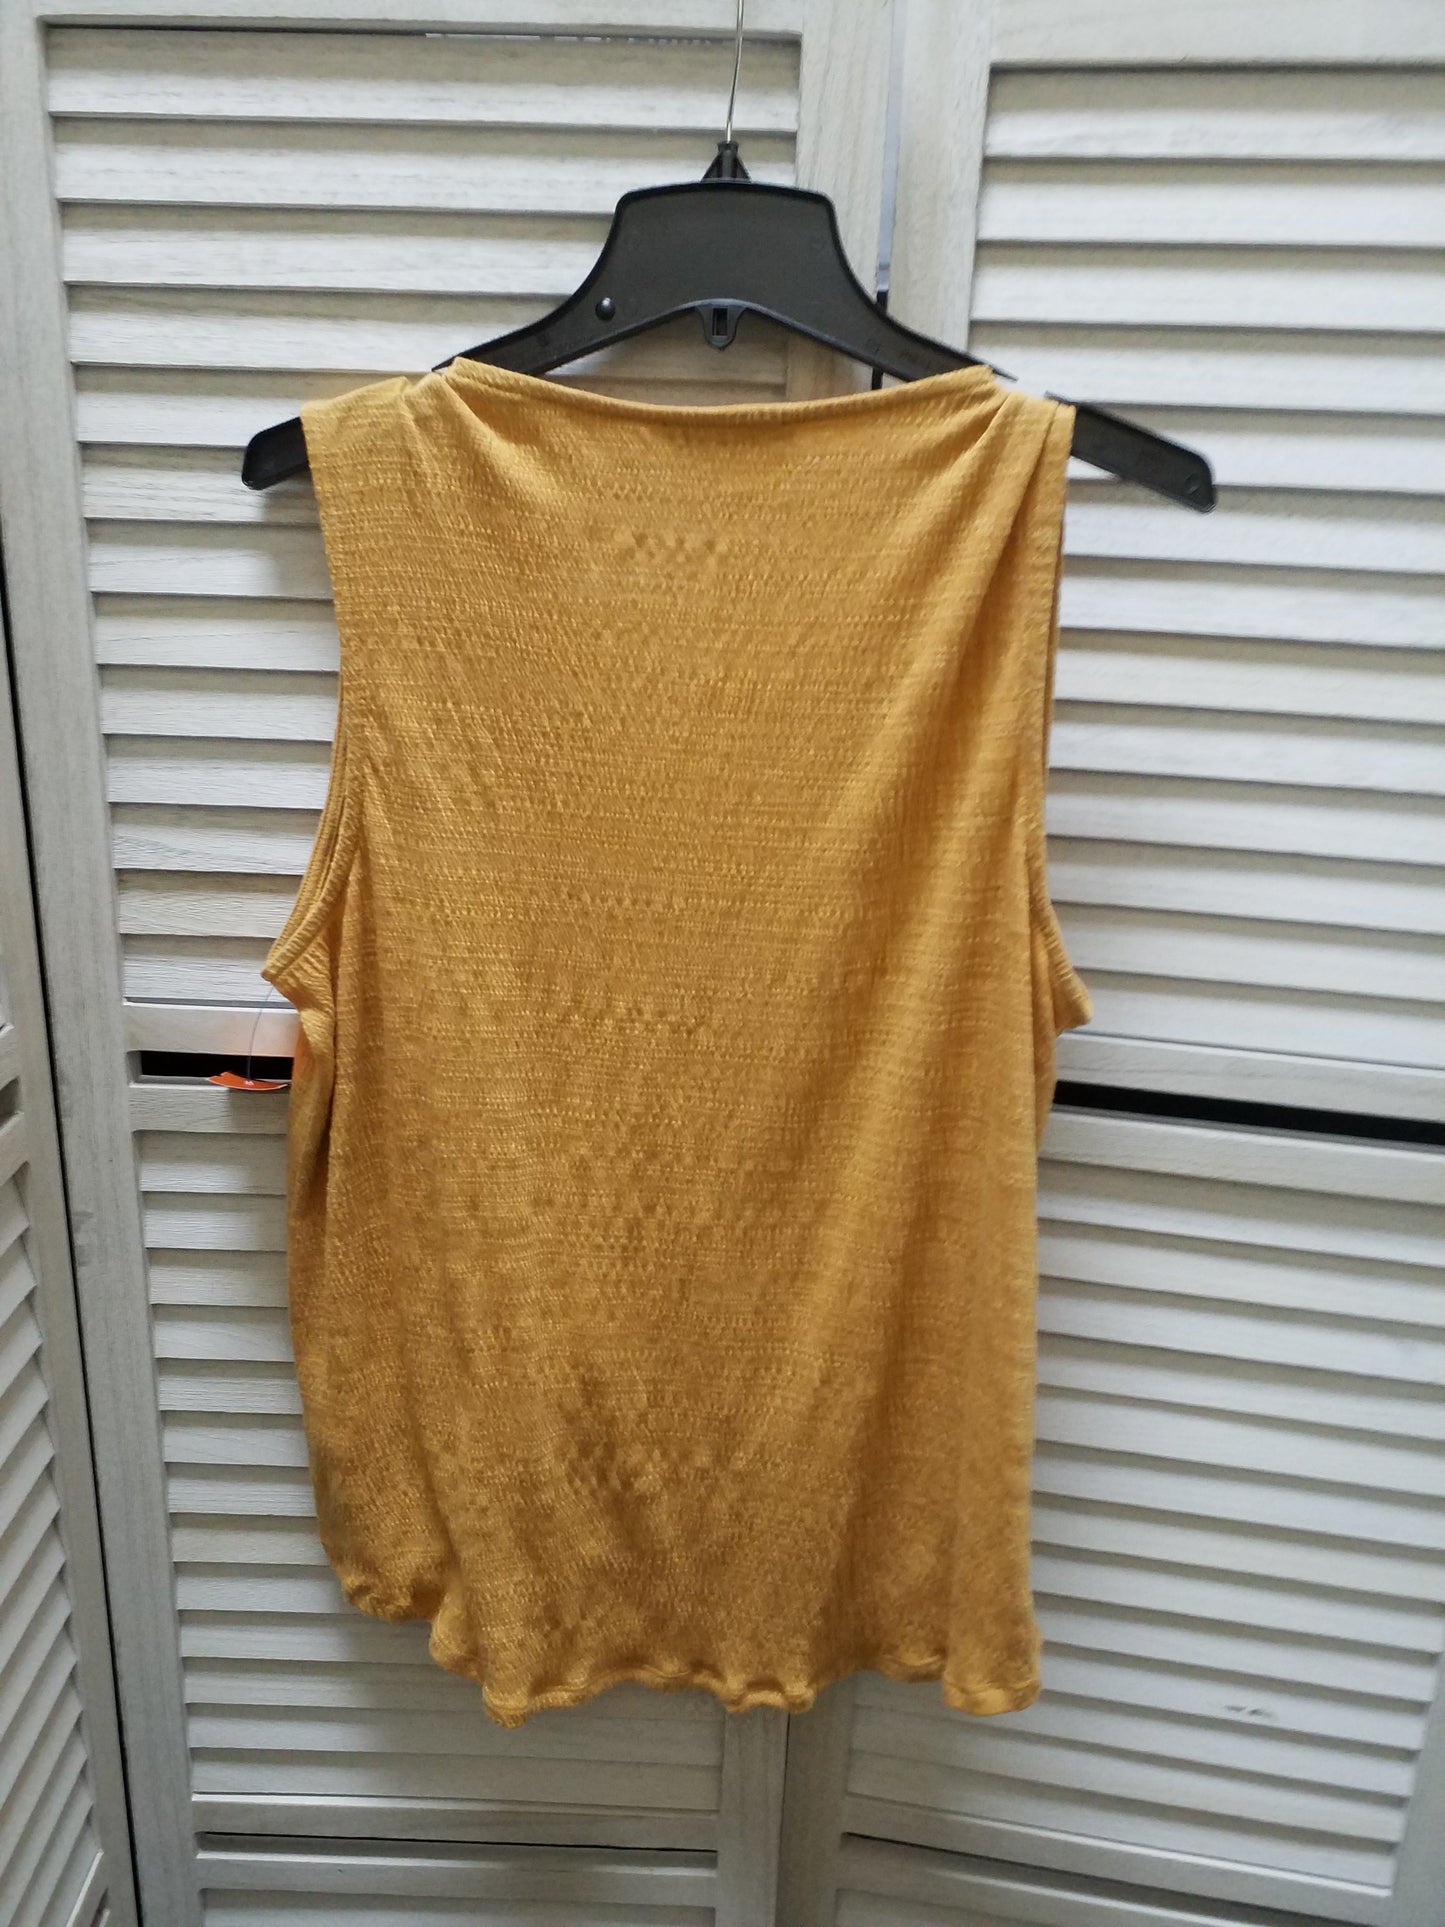 Top Sleeveless Basic By Cable And Gauge  Size: Xl